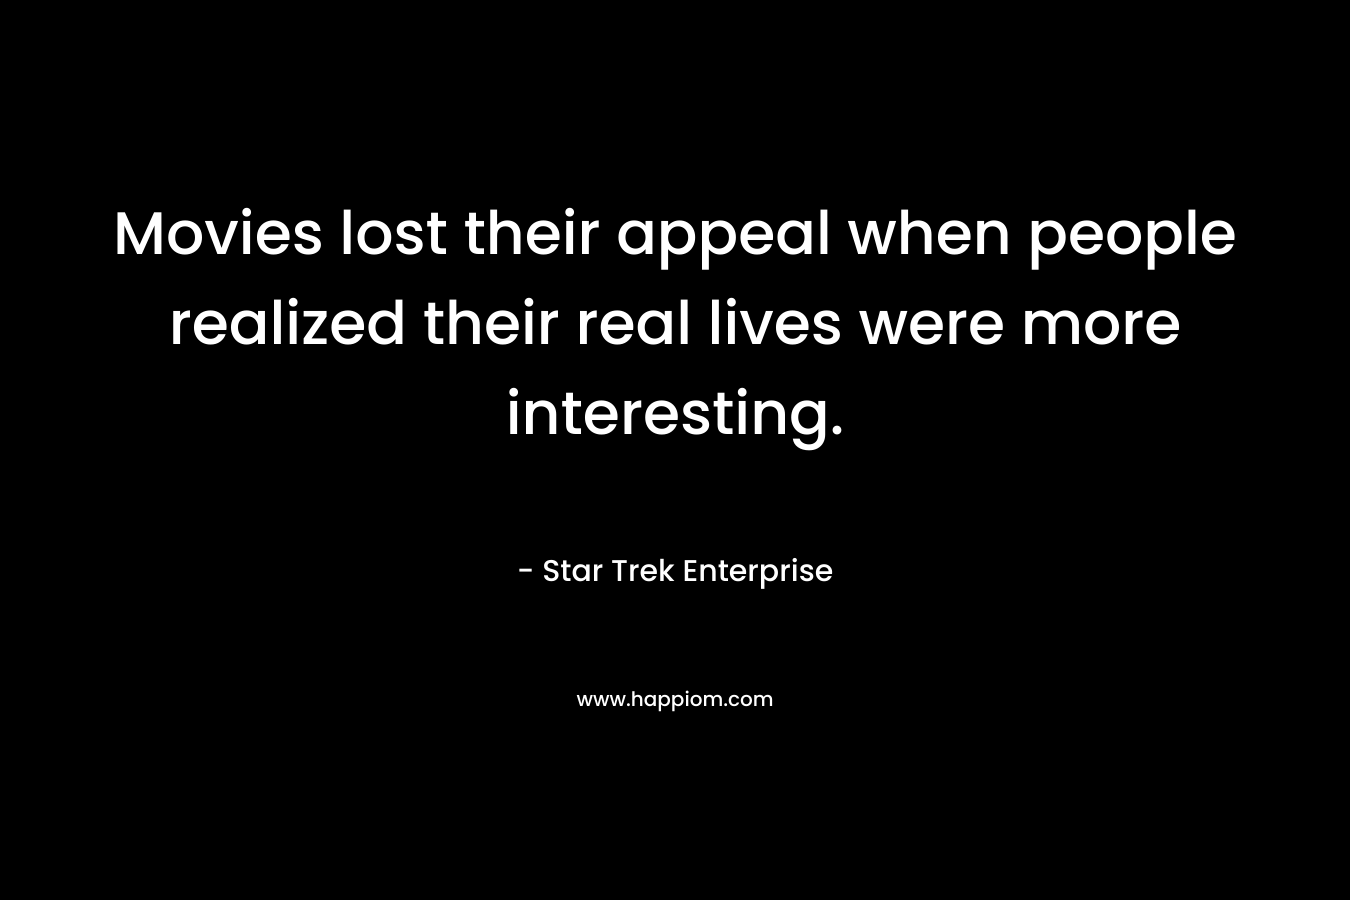 Movies lost their appeal when people realized their real lives were more interesting. – Star Trek Enterprise